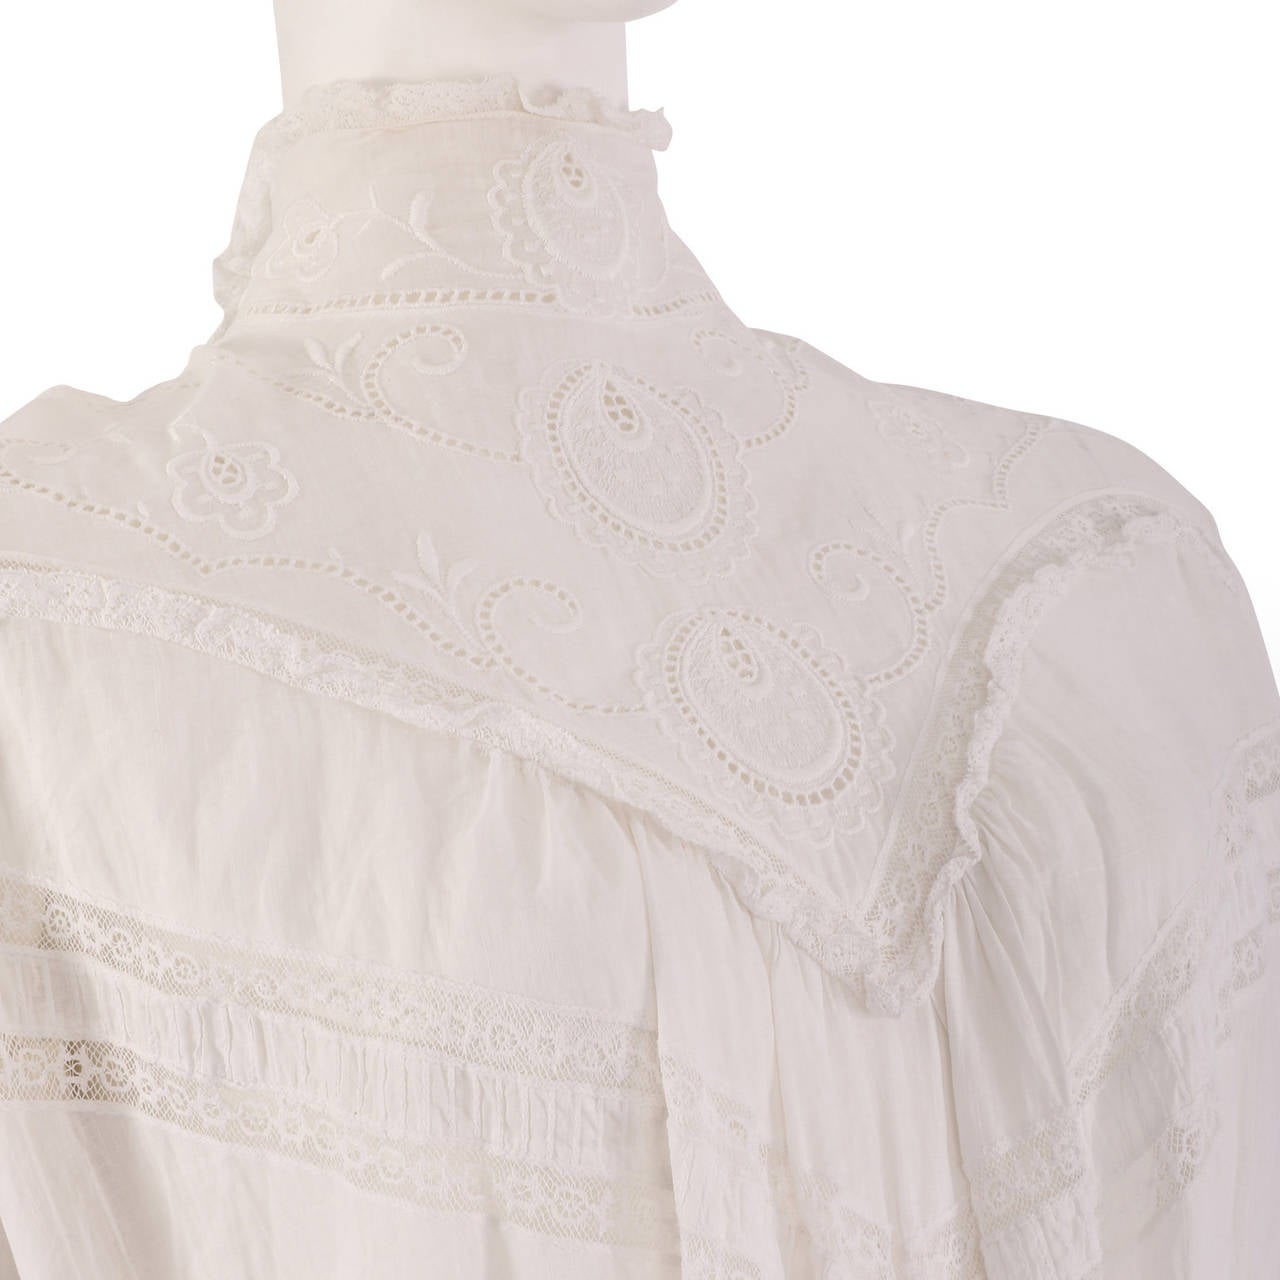 Victorian White Embroidery and Lace High Neck Lawn Dress 1